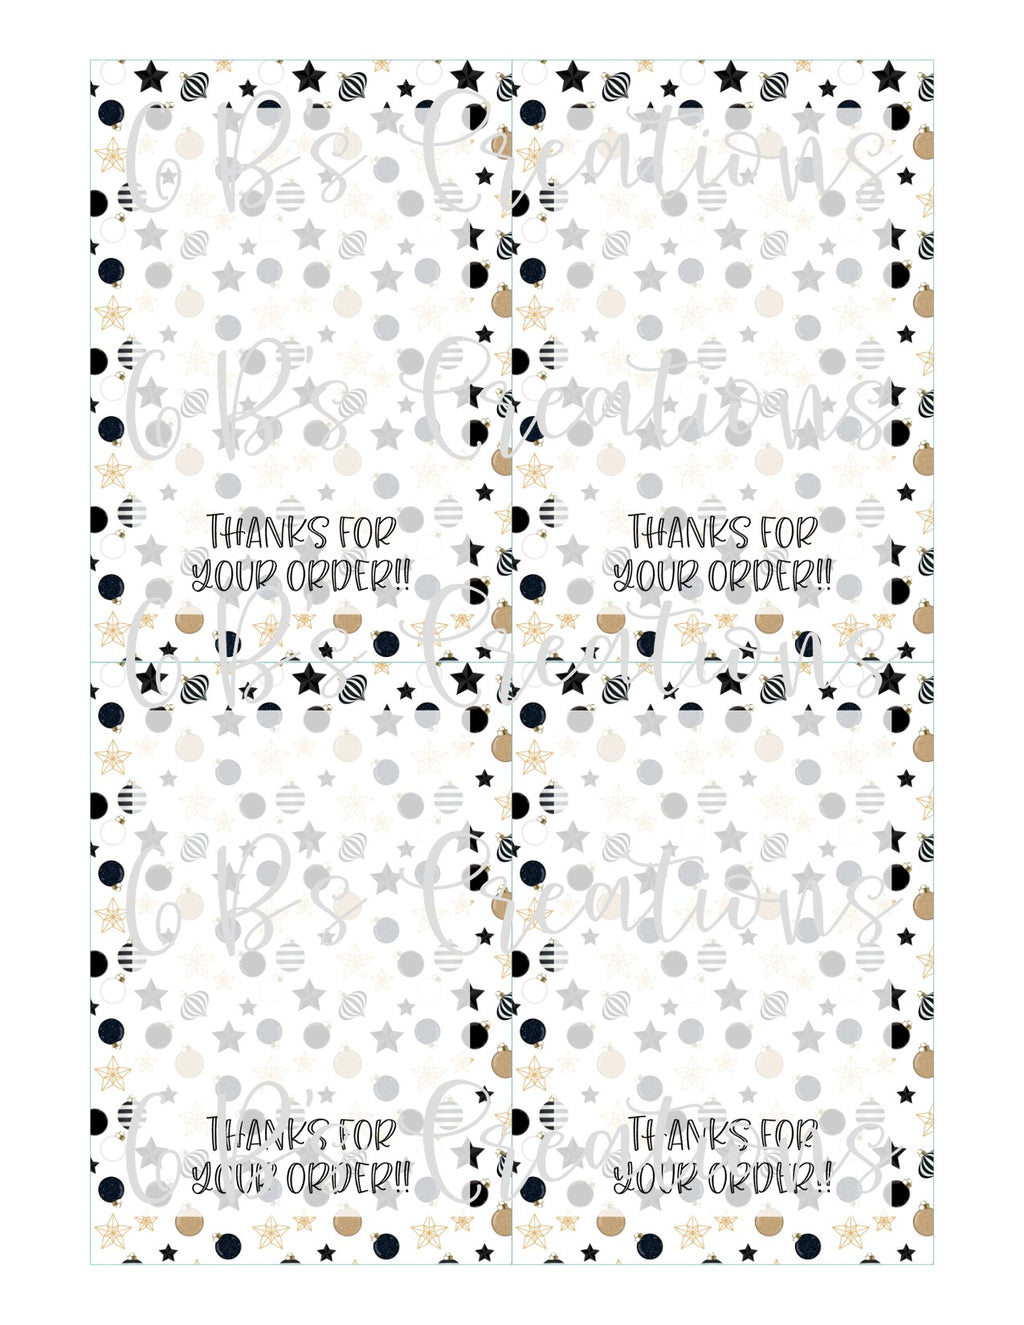 Thanks for your order Printable Tag - Black and Gold Stars